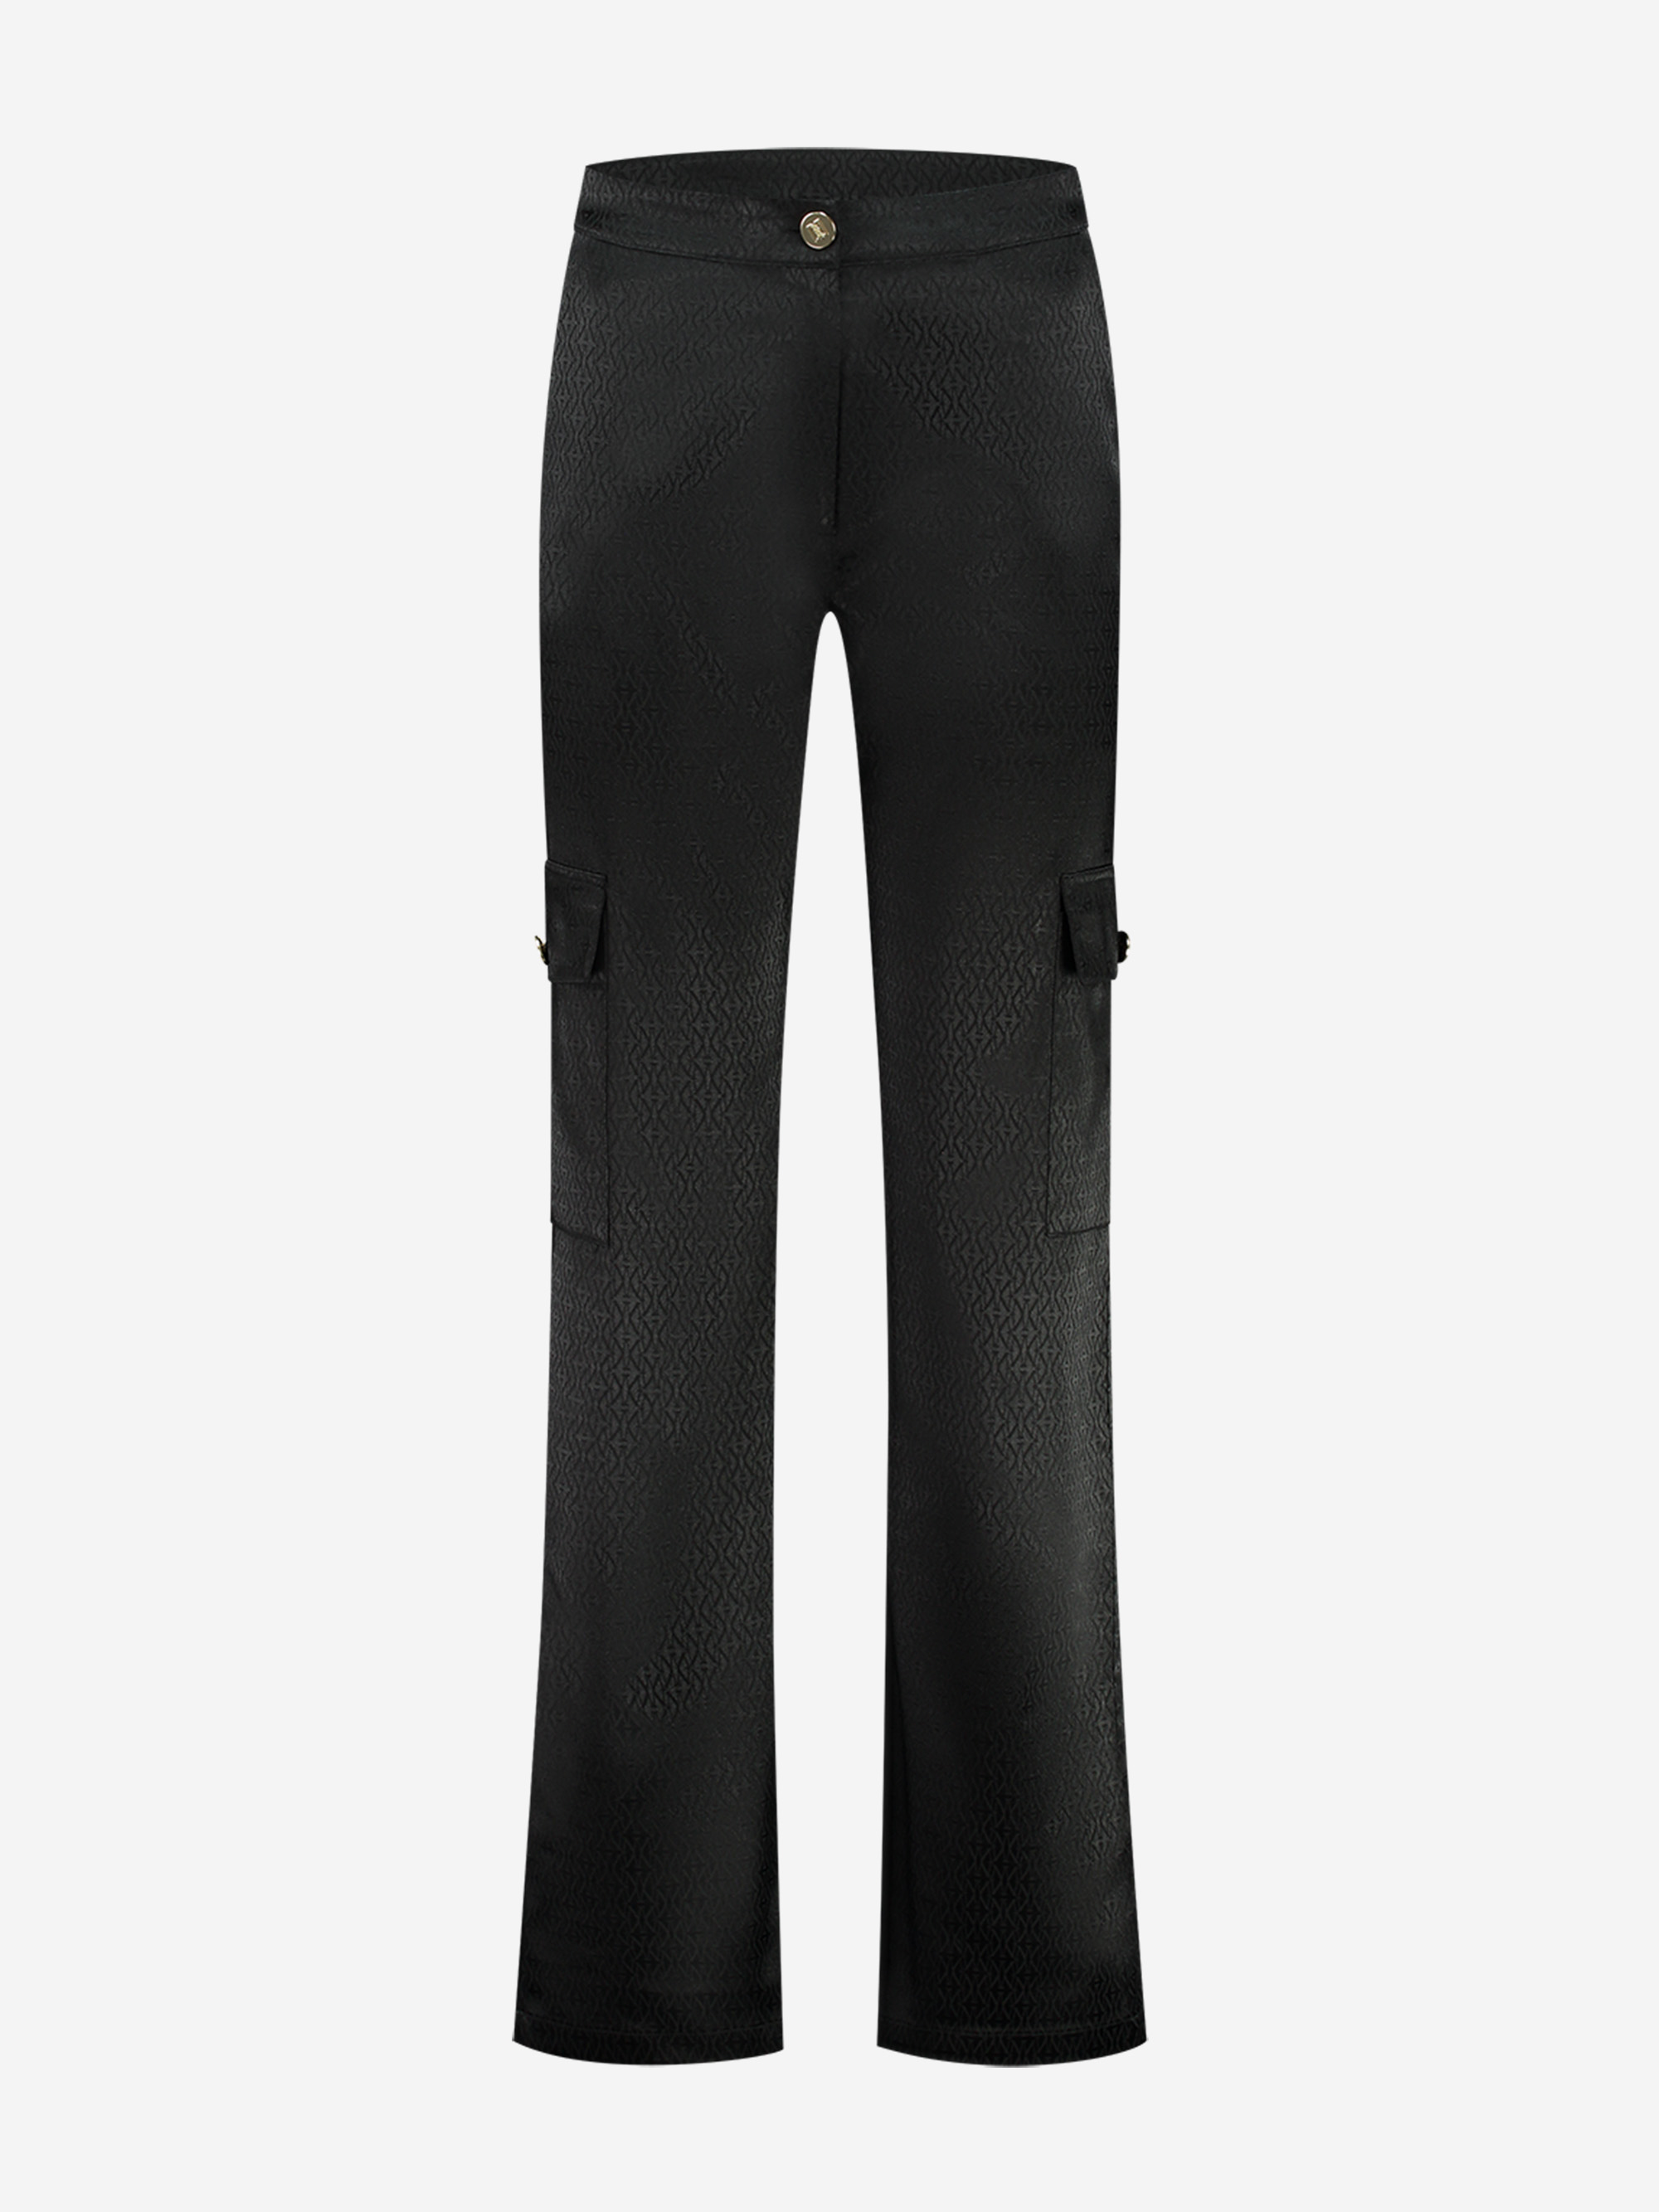 Straight leg pants with side pockets